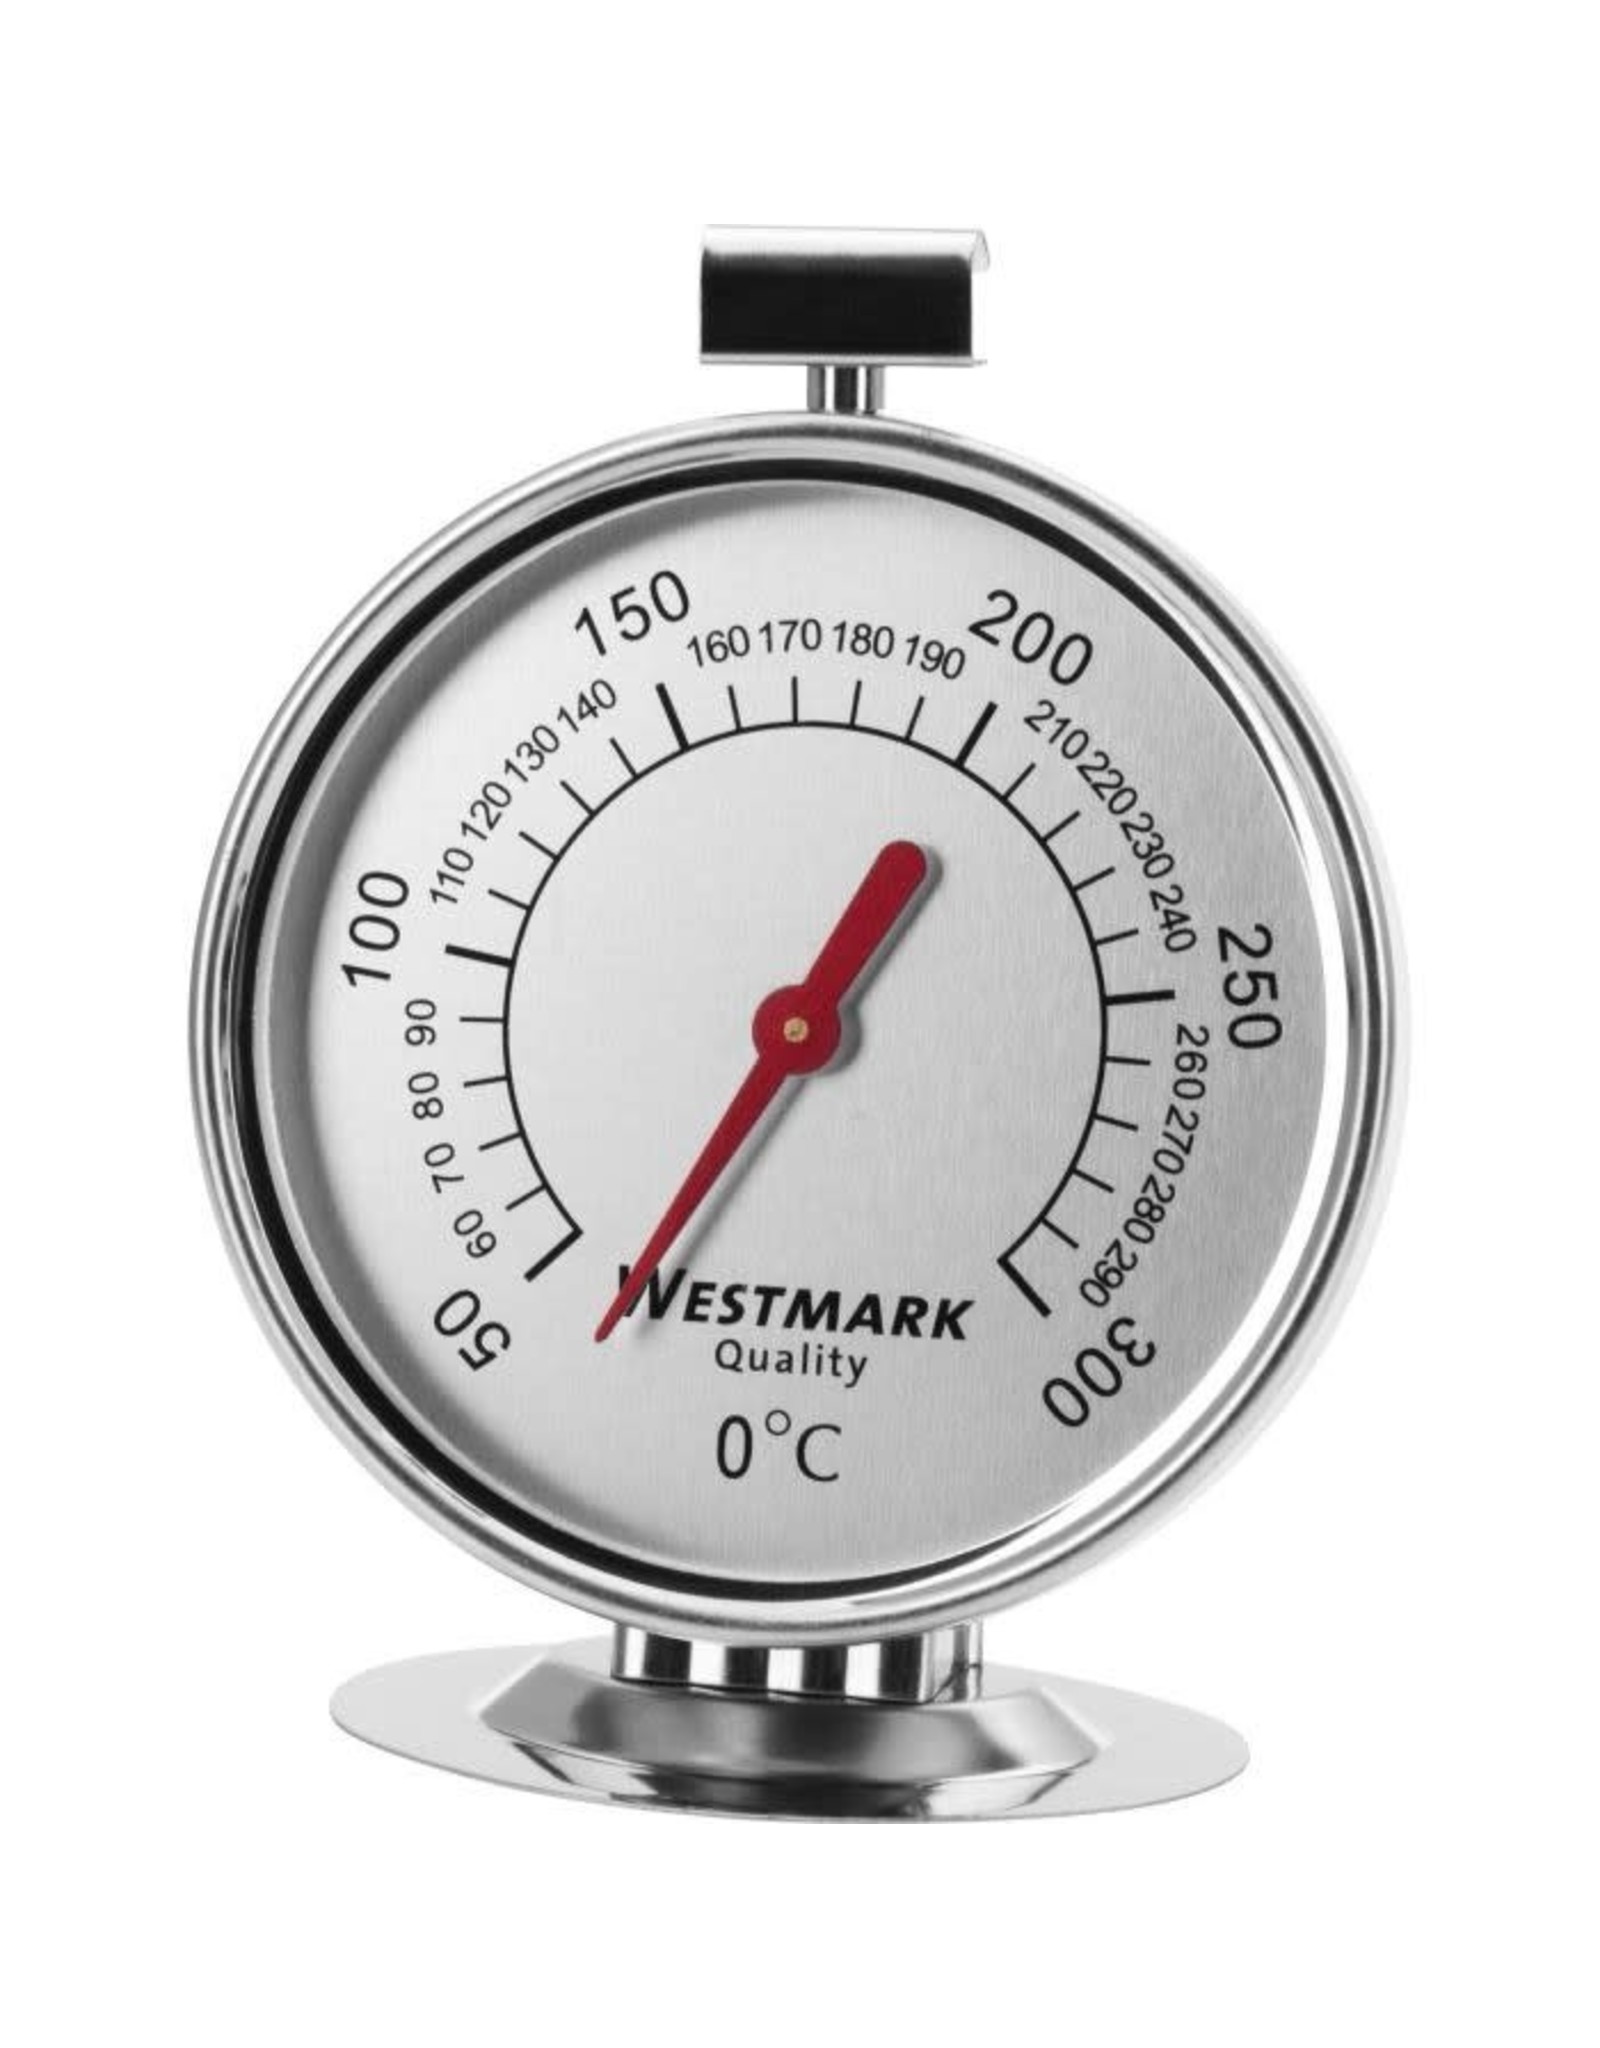 Westmark Westmark Oven Thermometer